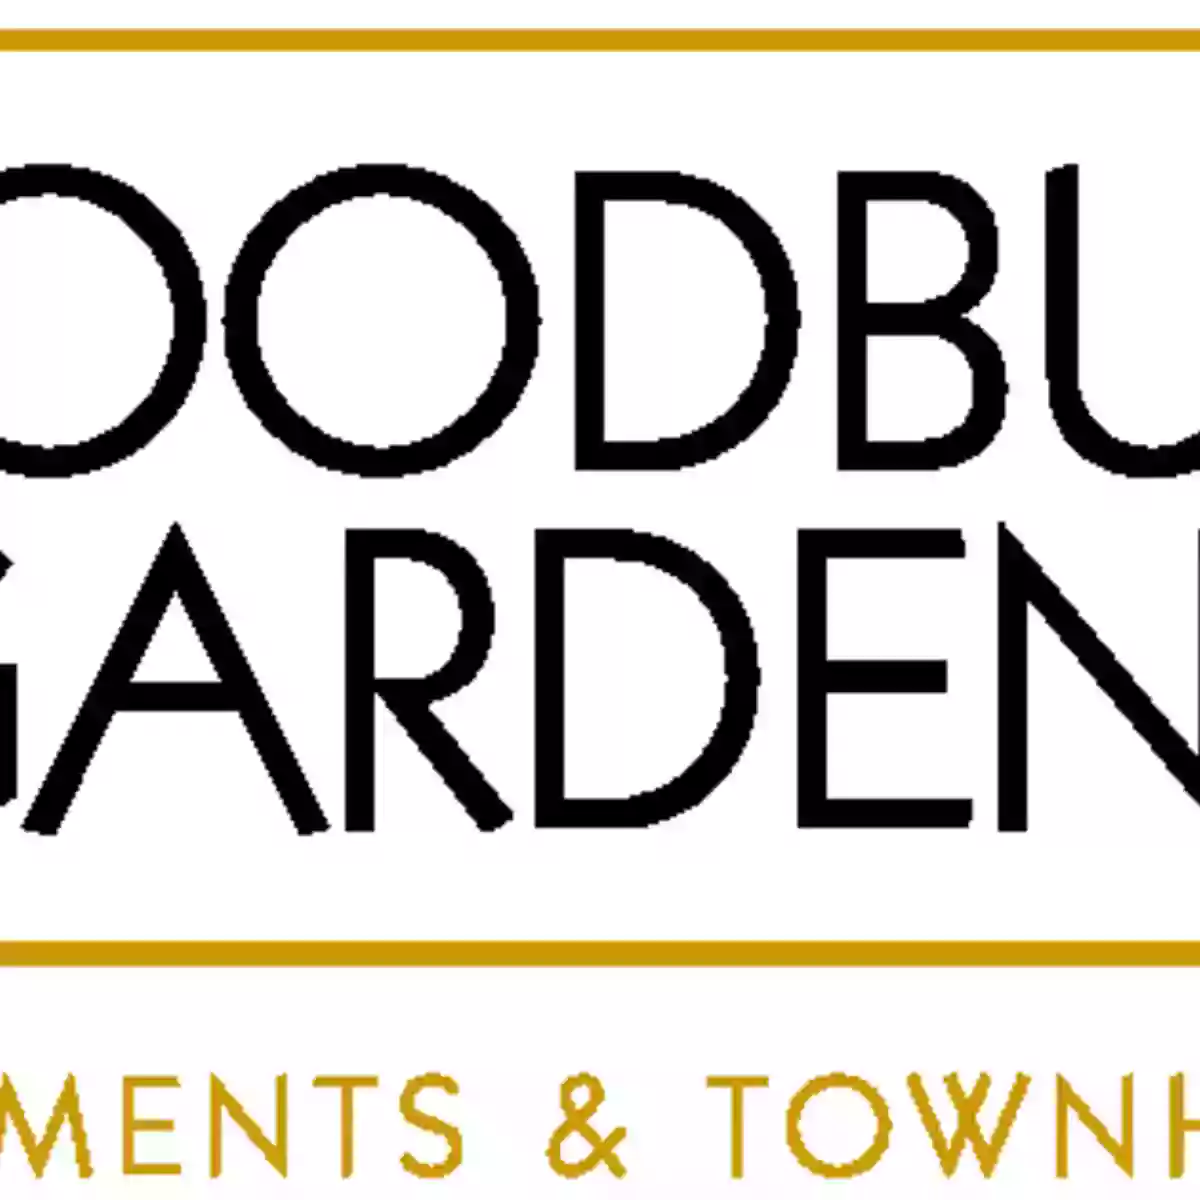 Woodbury Gardens Apartments & Townhomes